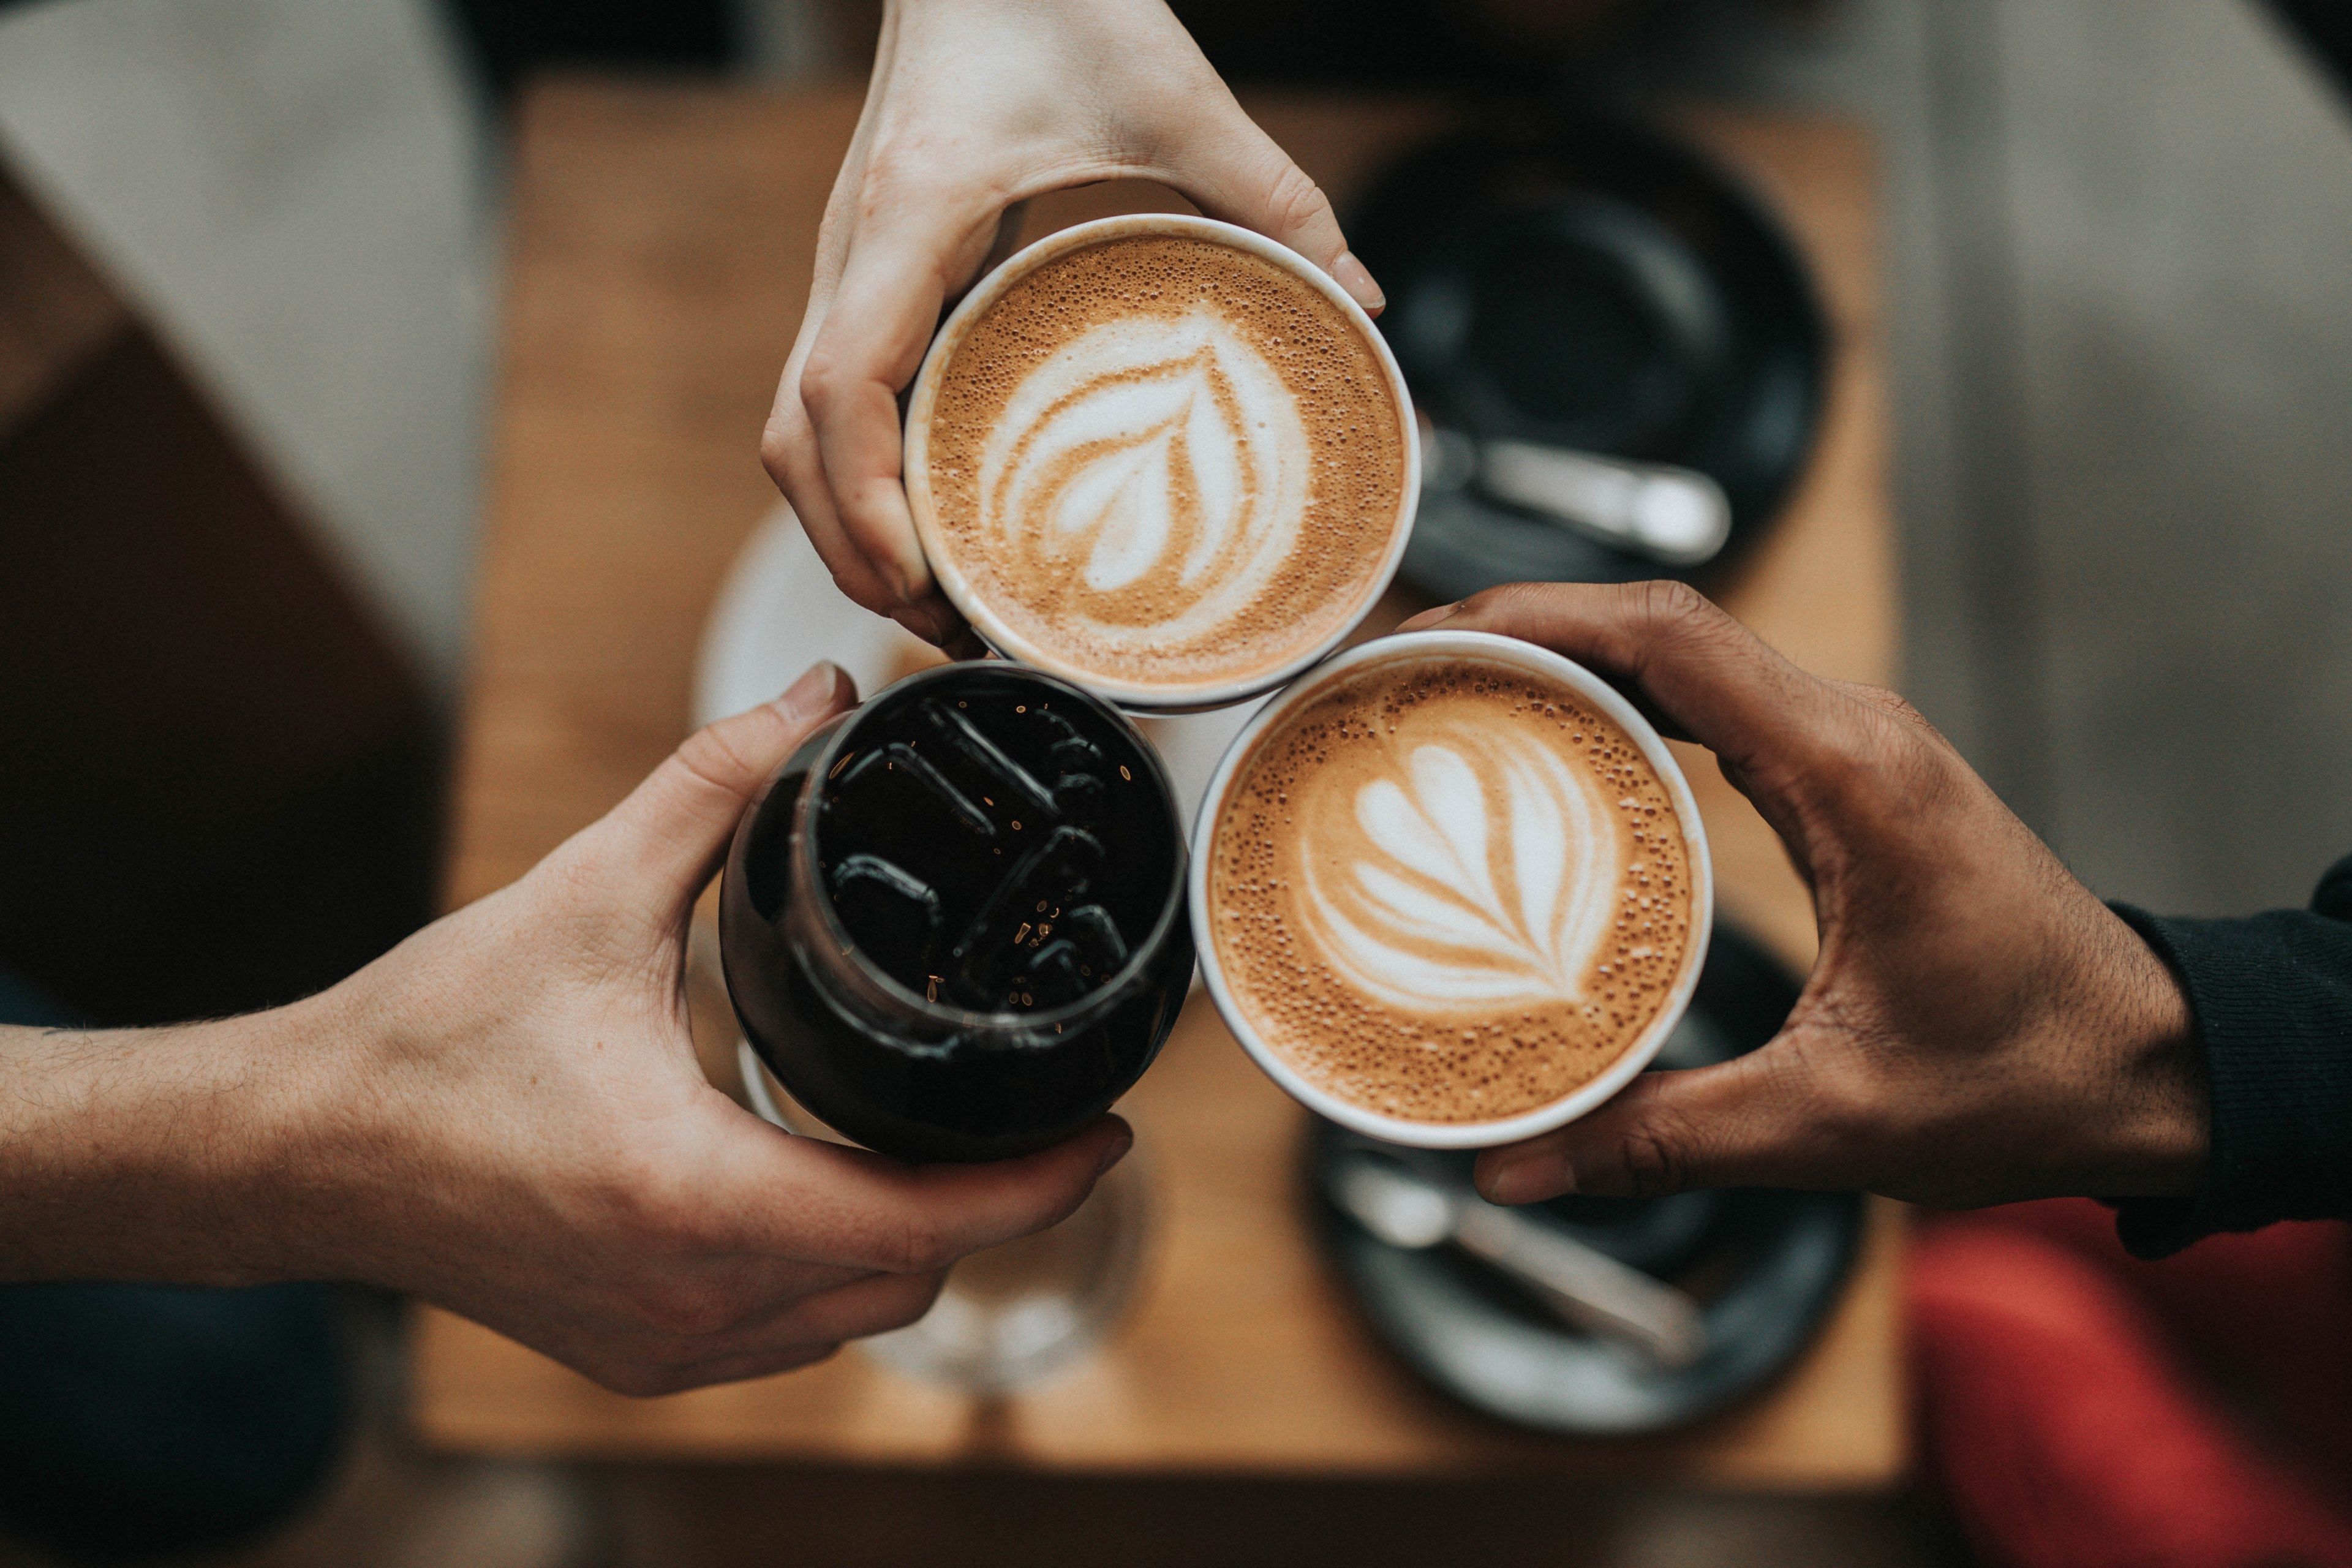 Wallpaper / three people cheering with iced coffee and lattes at verve coffee, coffee and friends 4k wallpaper